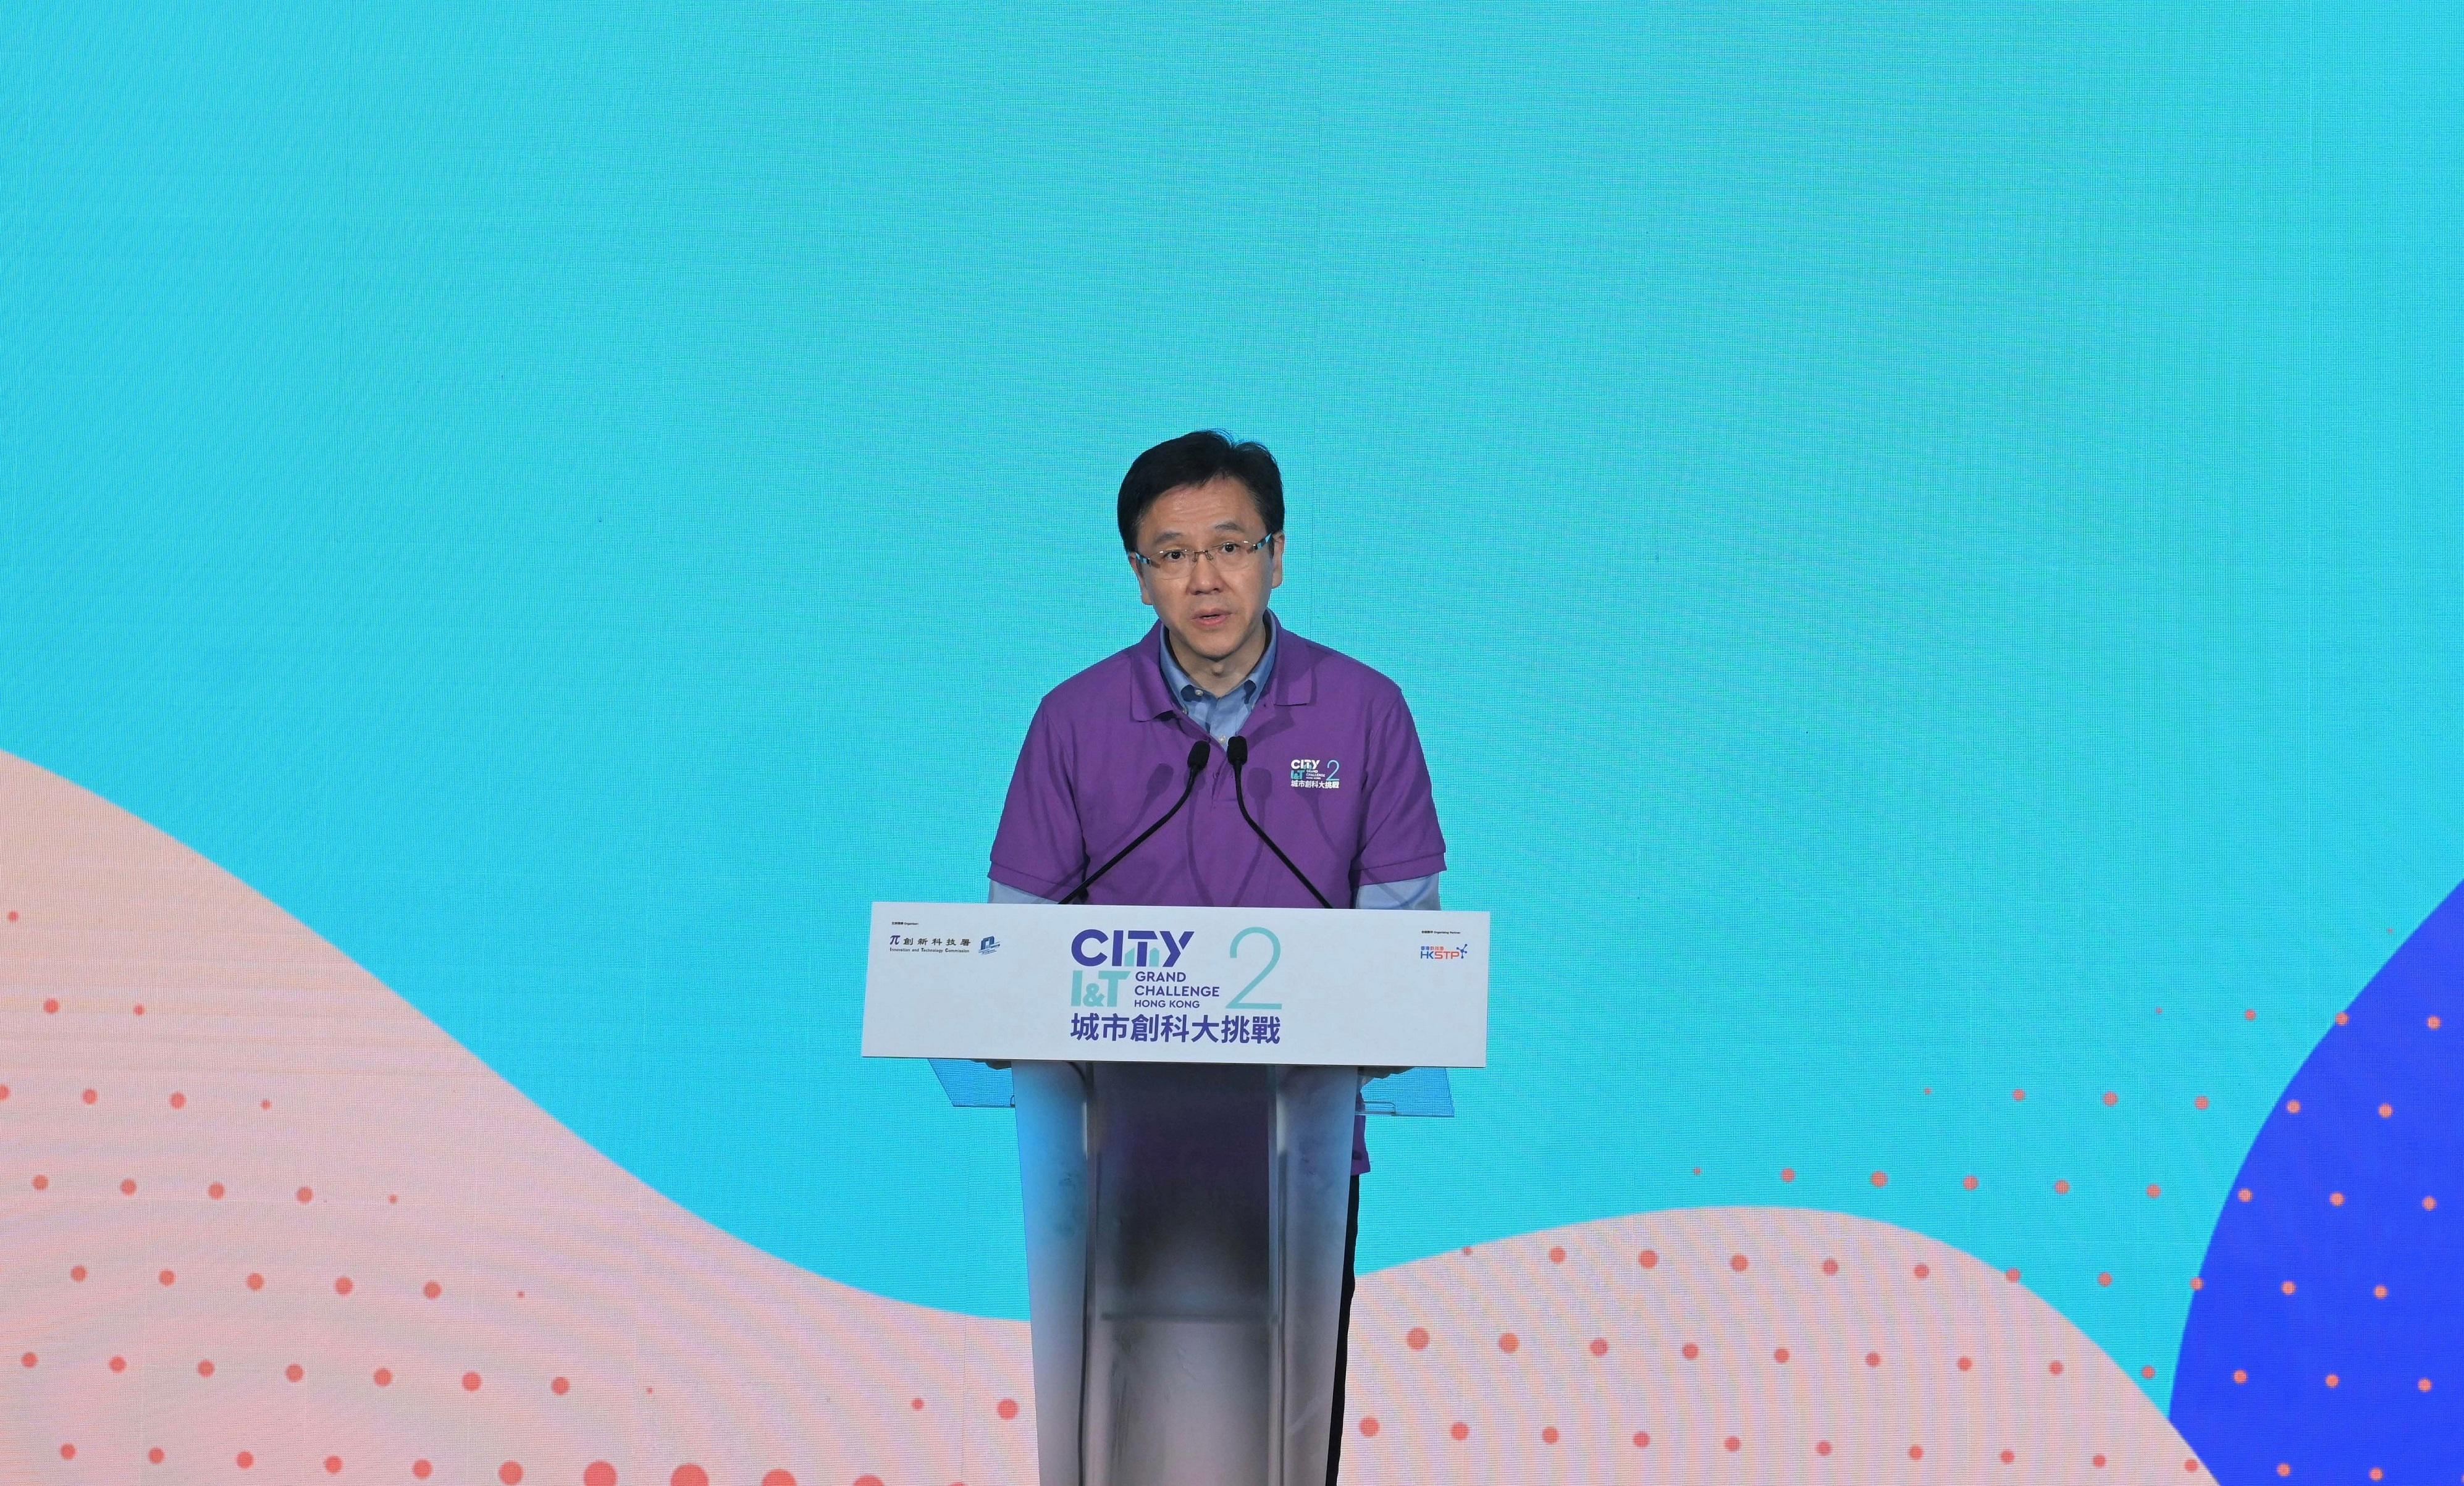 Organised by the Innovation and Technology Commission together with the Hong Kong Science and Technology Parks Corporation, the second City I&T Grand Challenge, was launched today (March 16). Photo shows the Secretary for Innovation, Technology and Industry, Professor Sun Dong, delivering welcoming remarks at the launching ceremony.